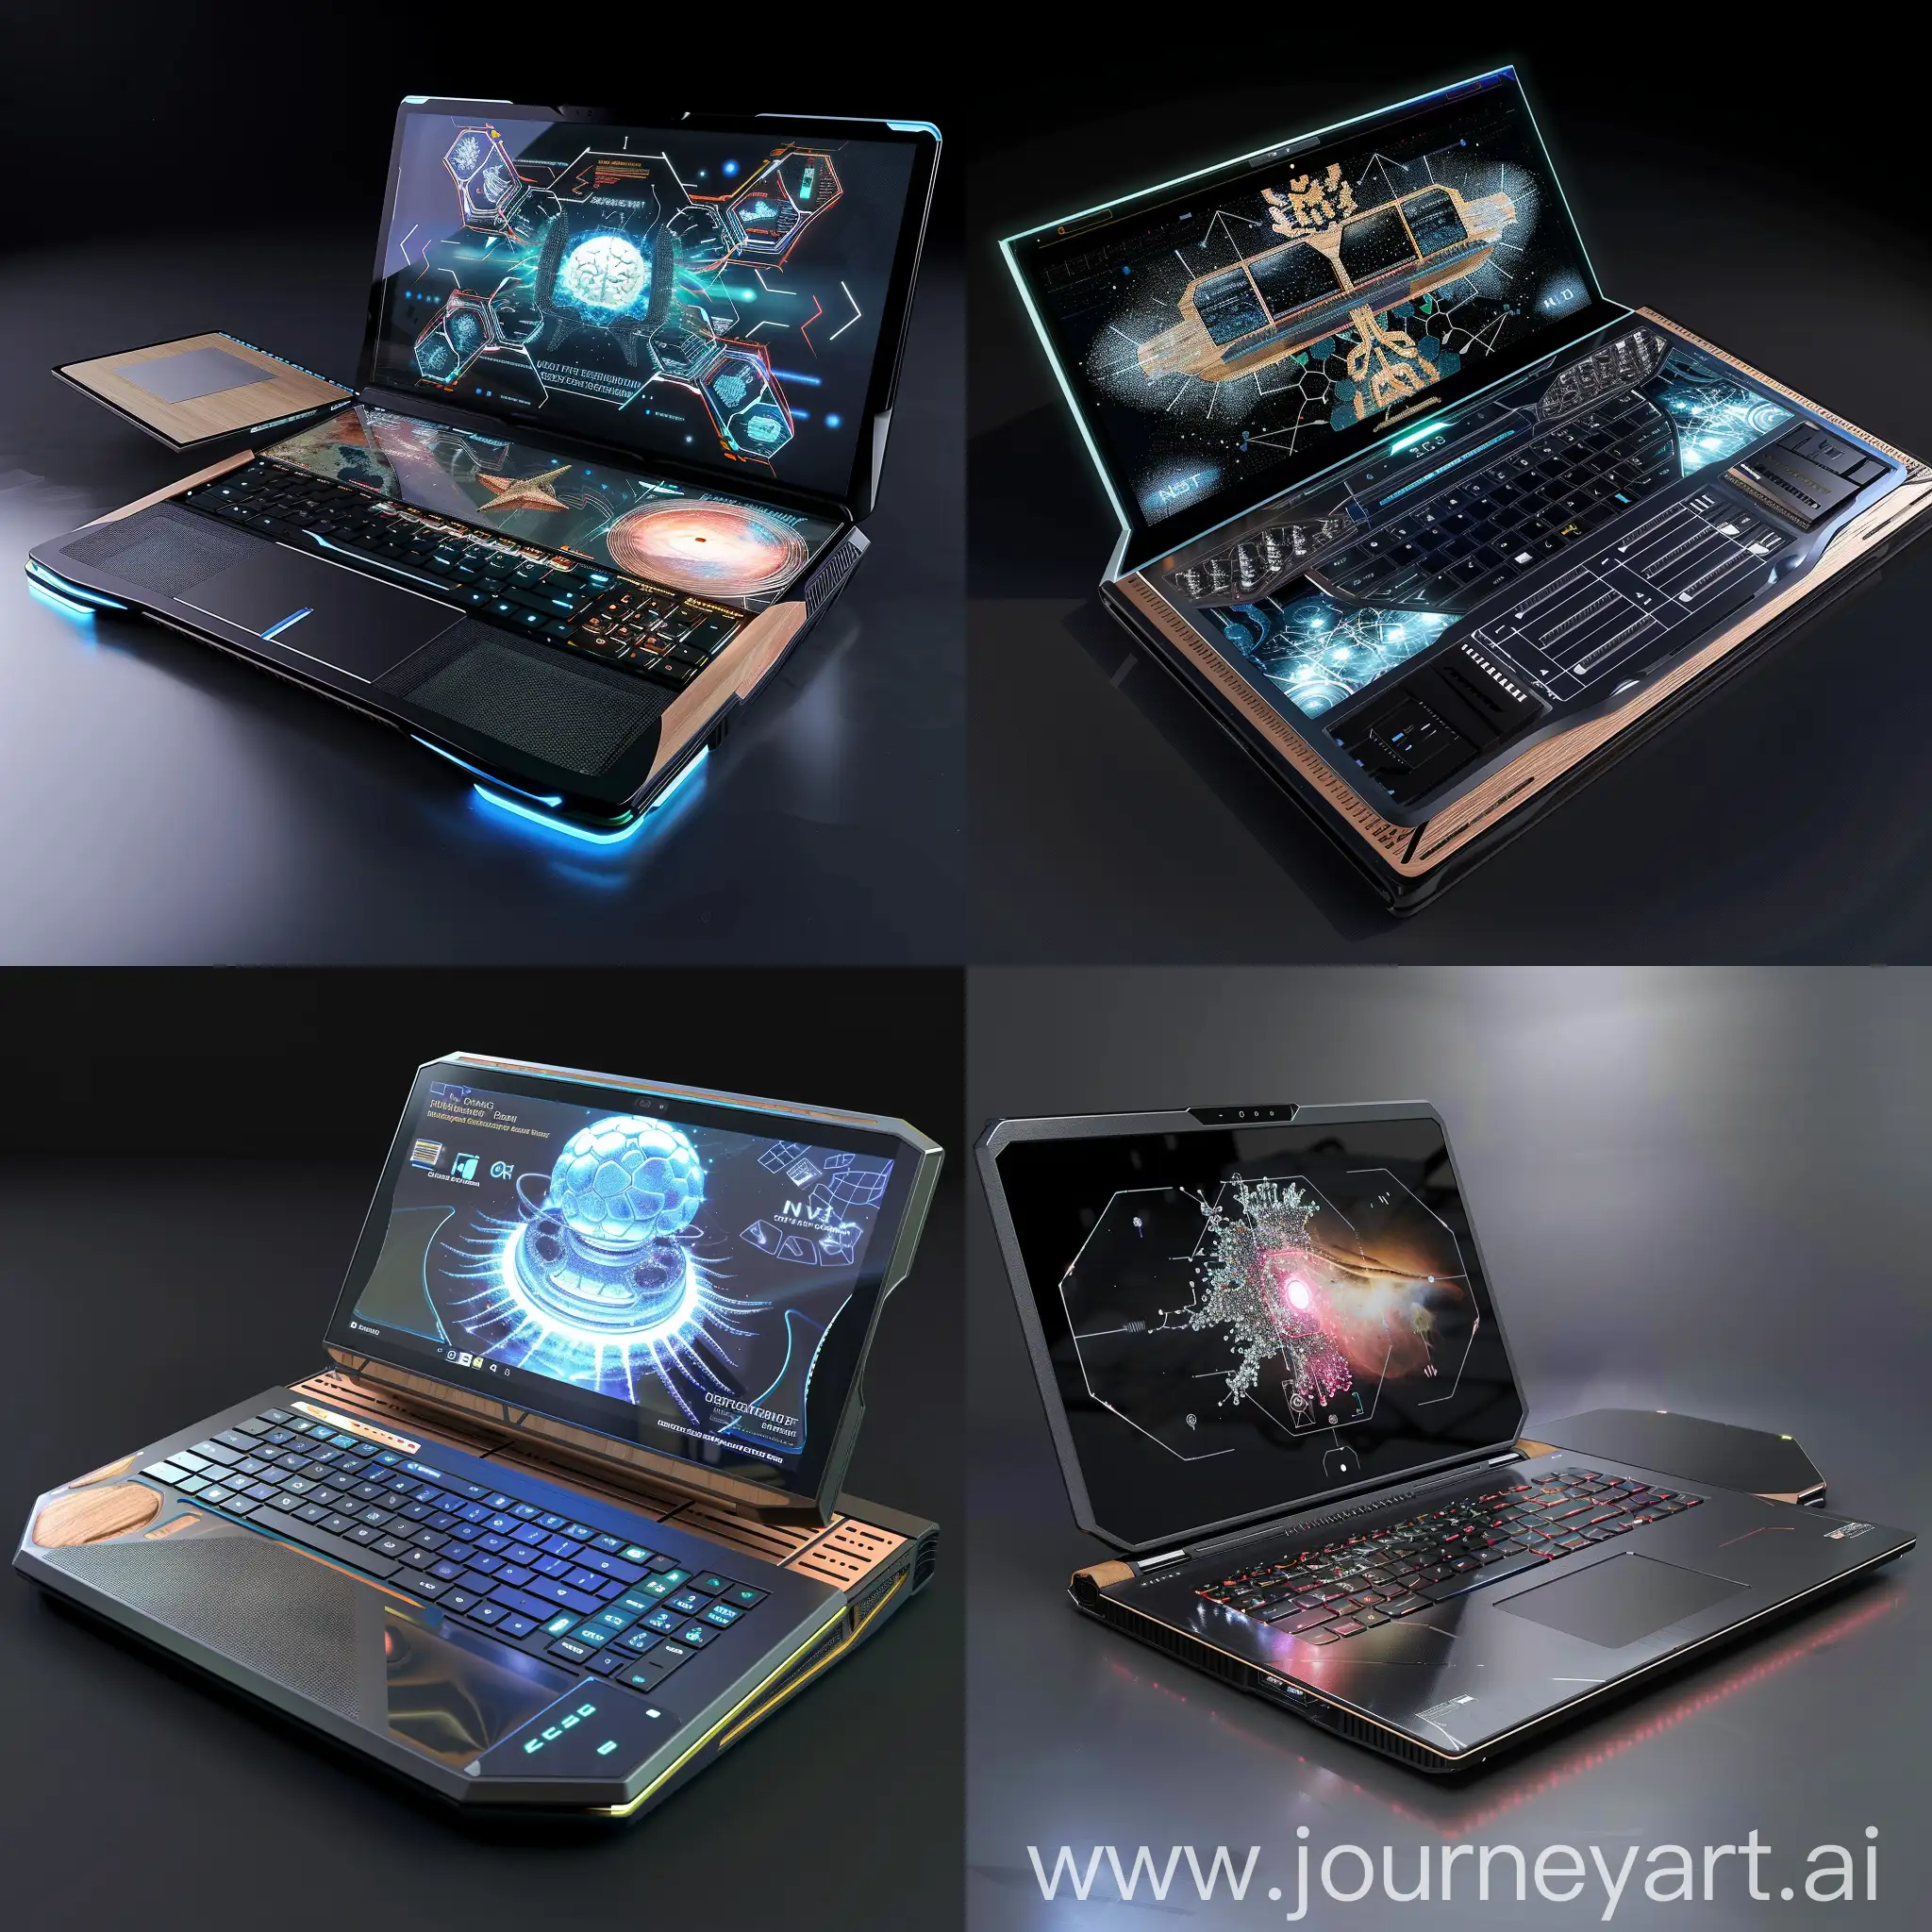 Futuristic-Quantum-Laptop-with-Holographic-Display-and-Sustainable-Design